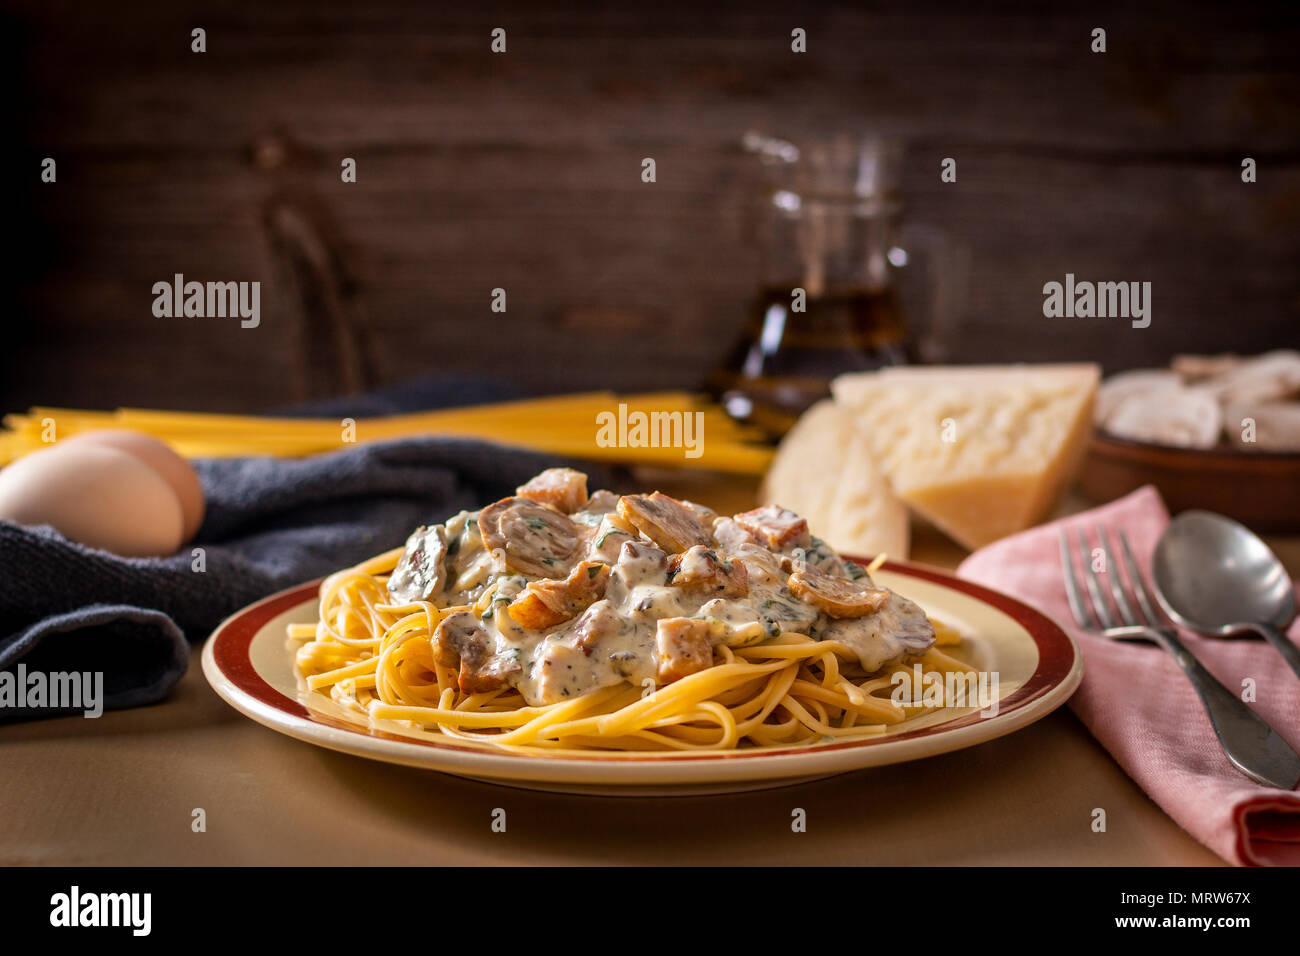 Plate with pasta topped with creamy sauce and mushrooms served on table with cooking ingredients Stock Photo